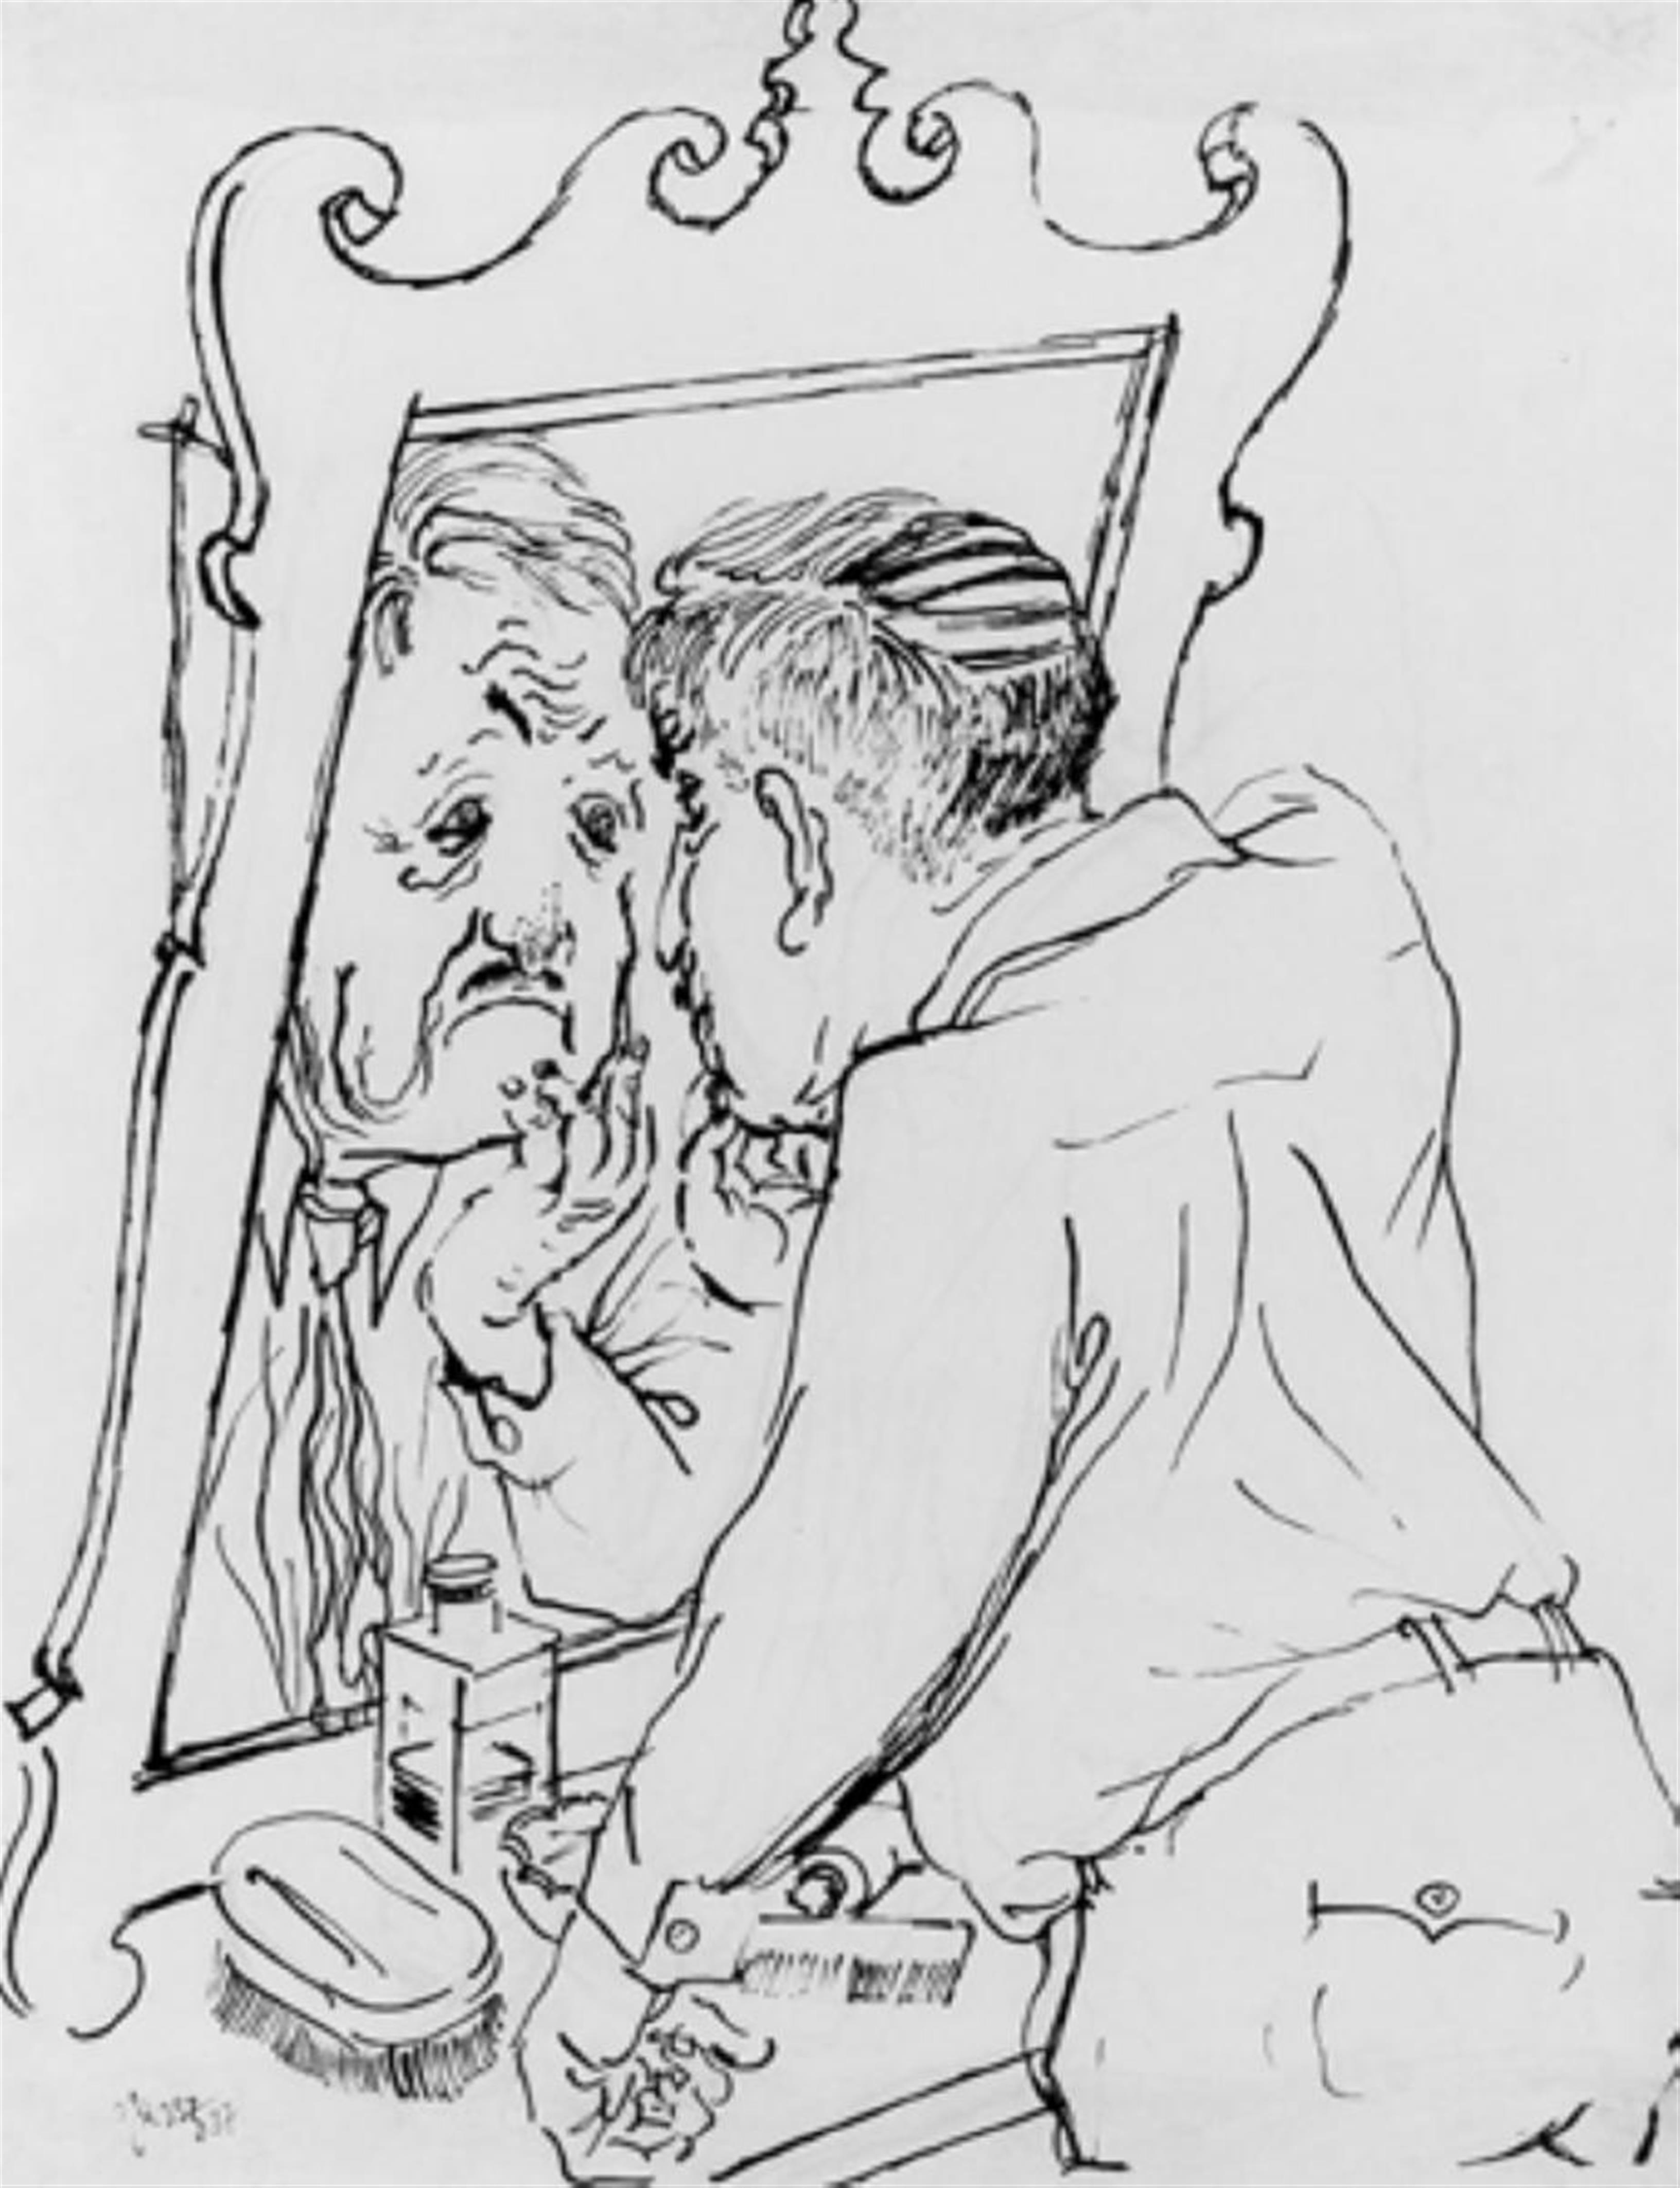 George Grosz - The day after - image-1